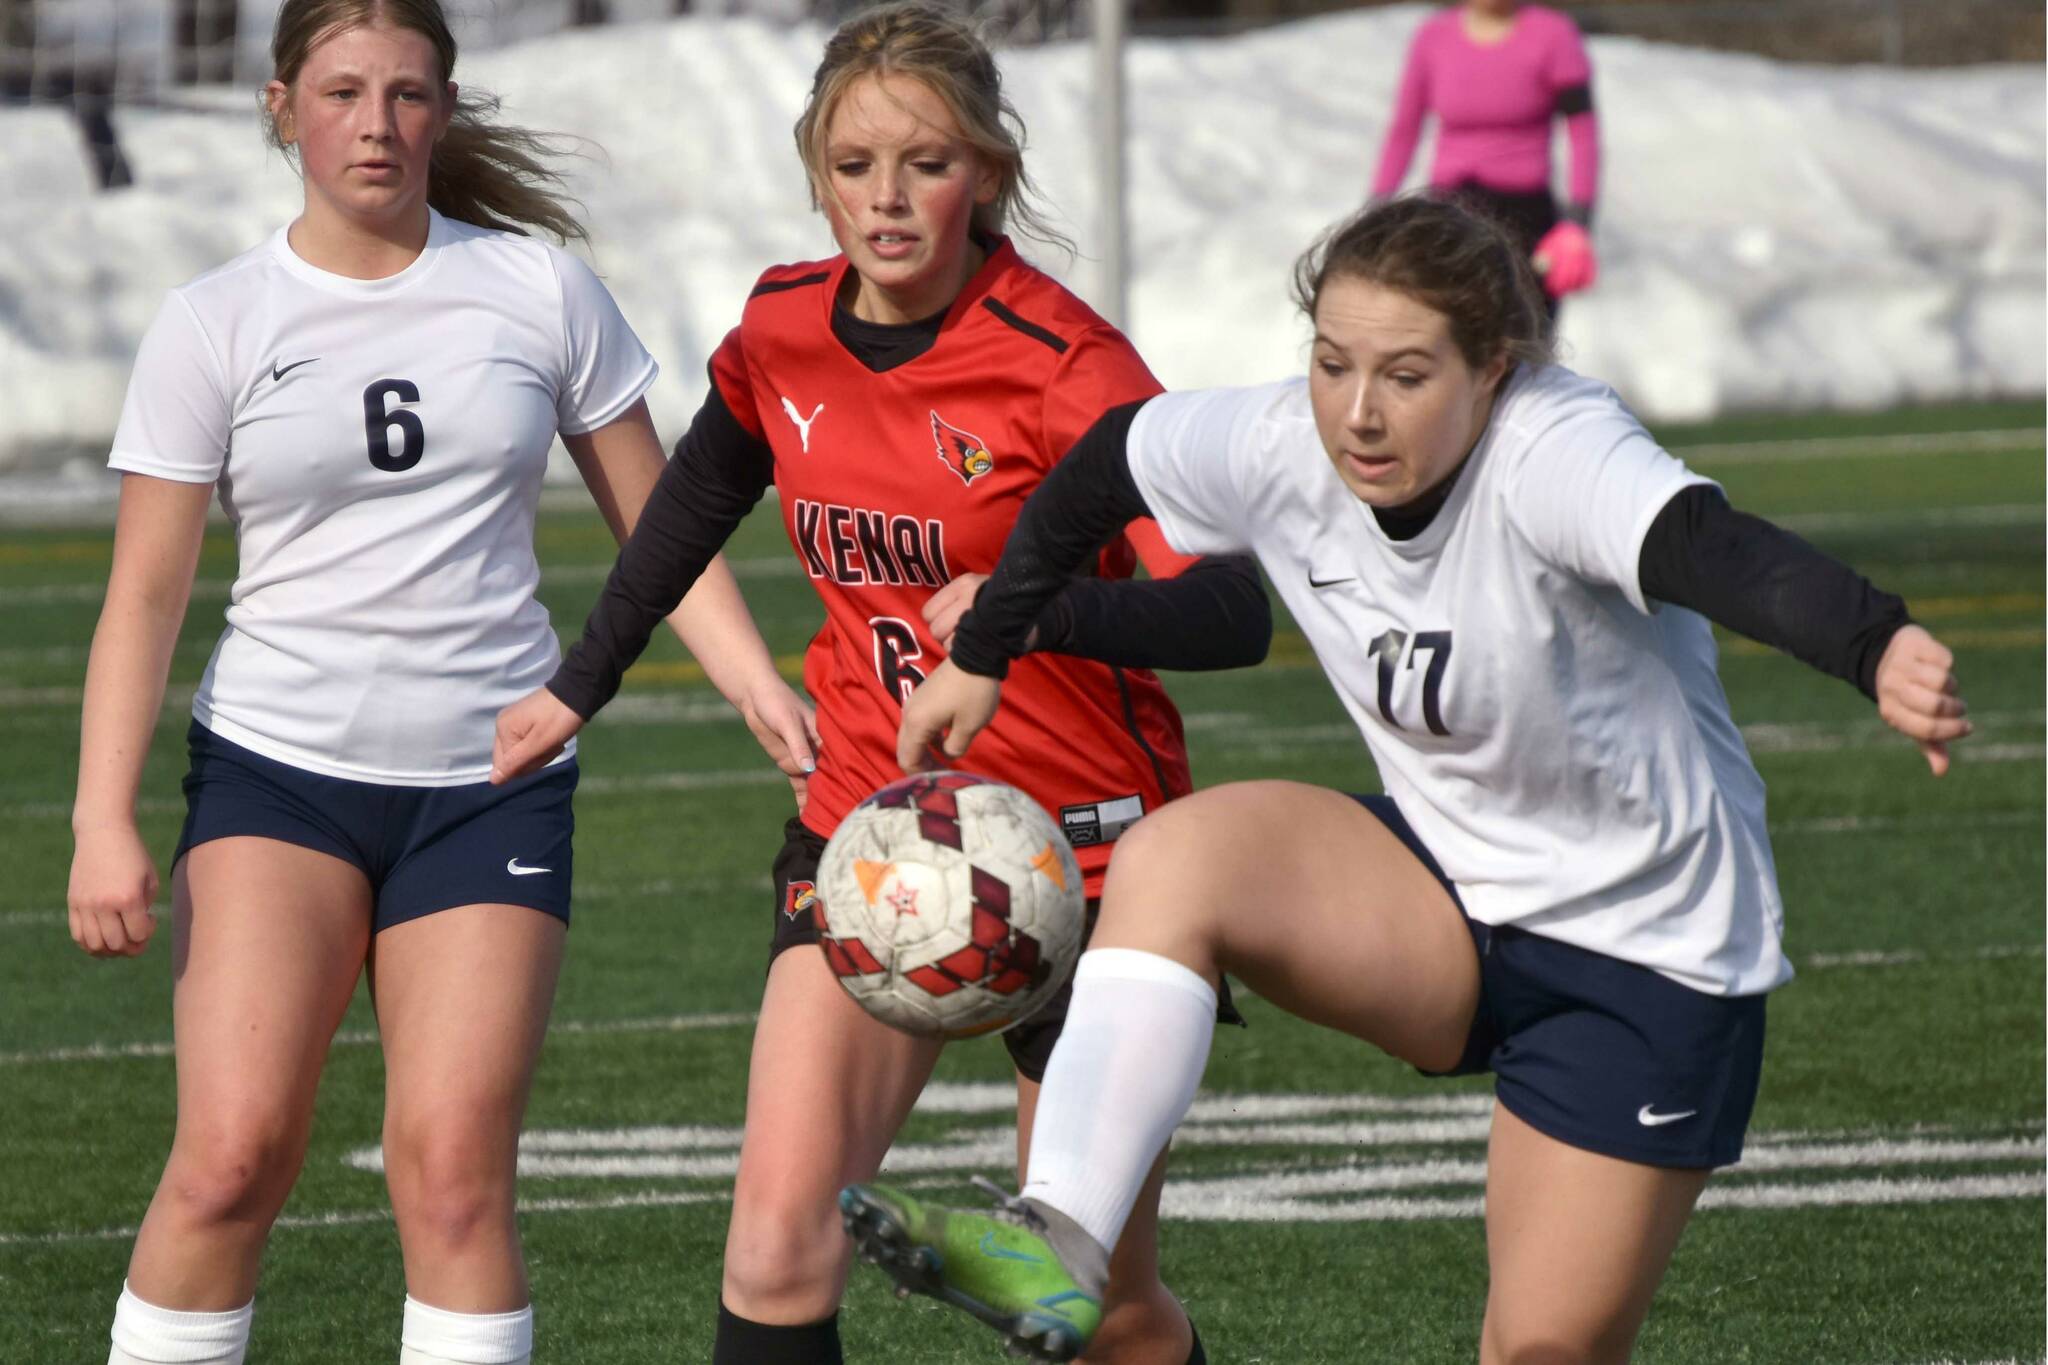 Soldotna's Liberty Miller controls the ball in front of Kenai Central's Kori Moore and Soldotna's Alex Lee on Tuesday, April 18, 2023, at Ed Hollier Field at Kenai Central High School in Kenai, Alaska. (Photo by Jeff Helminiak/Peninsula Clarion)